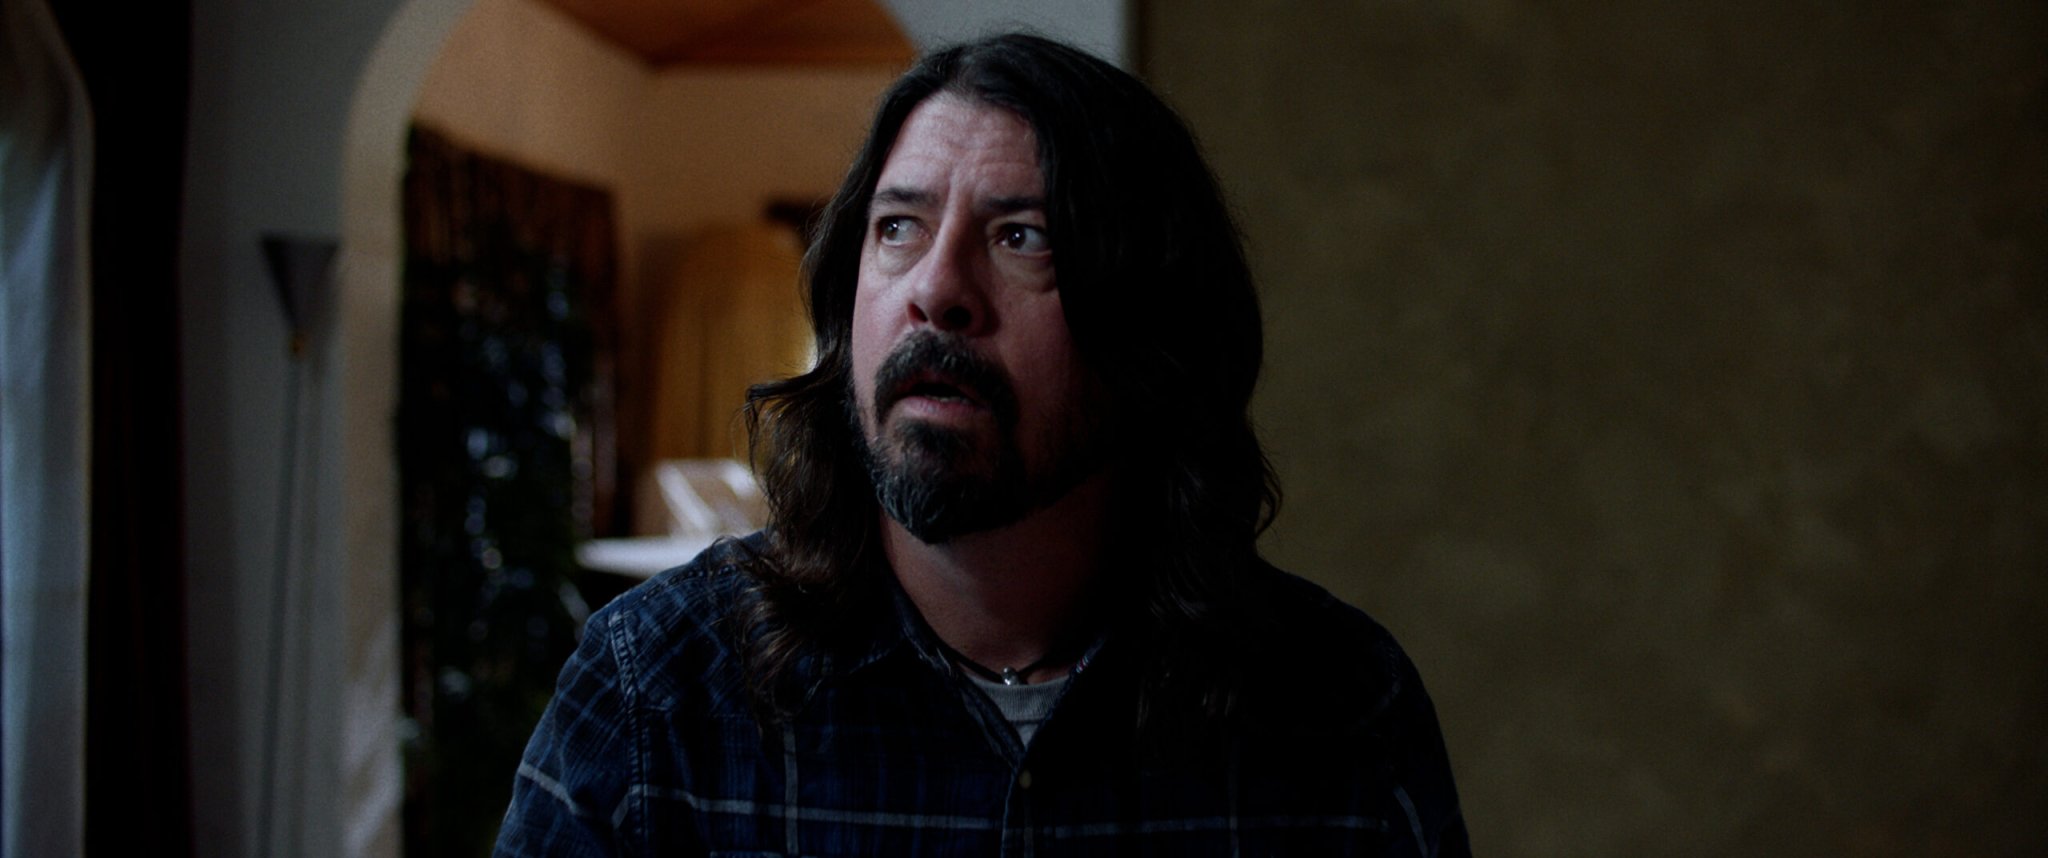 Dave Grohl on Becoming a Demon in Foo Fighters' New Movie 'Studio 666'